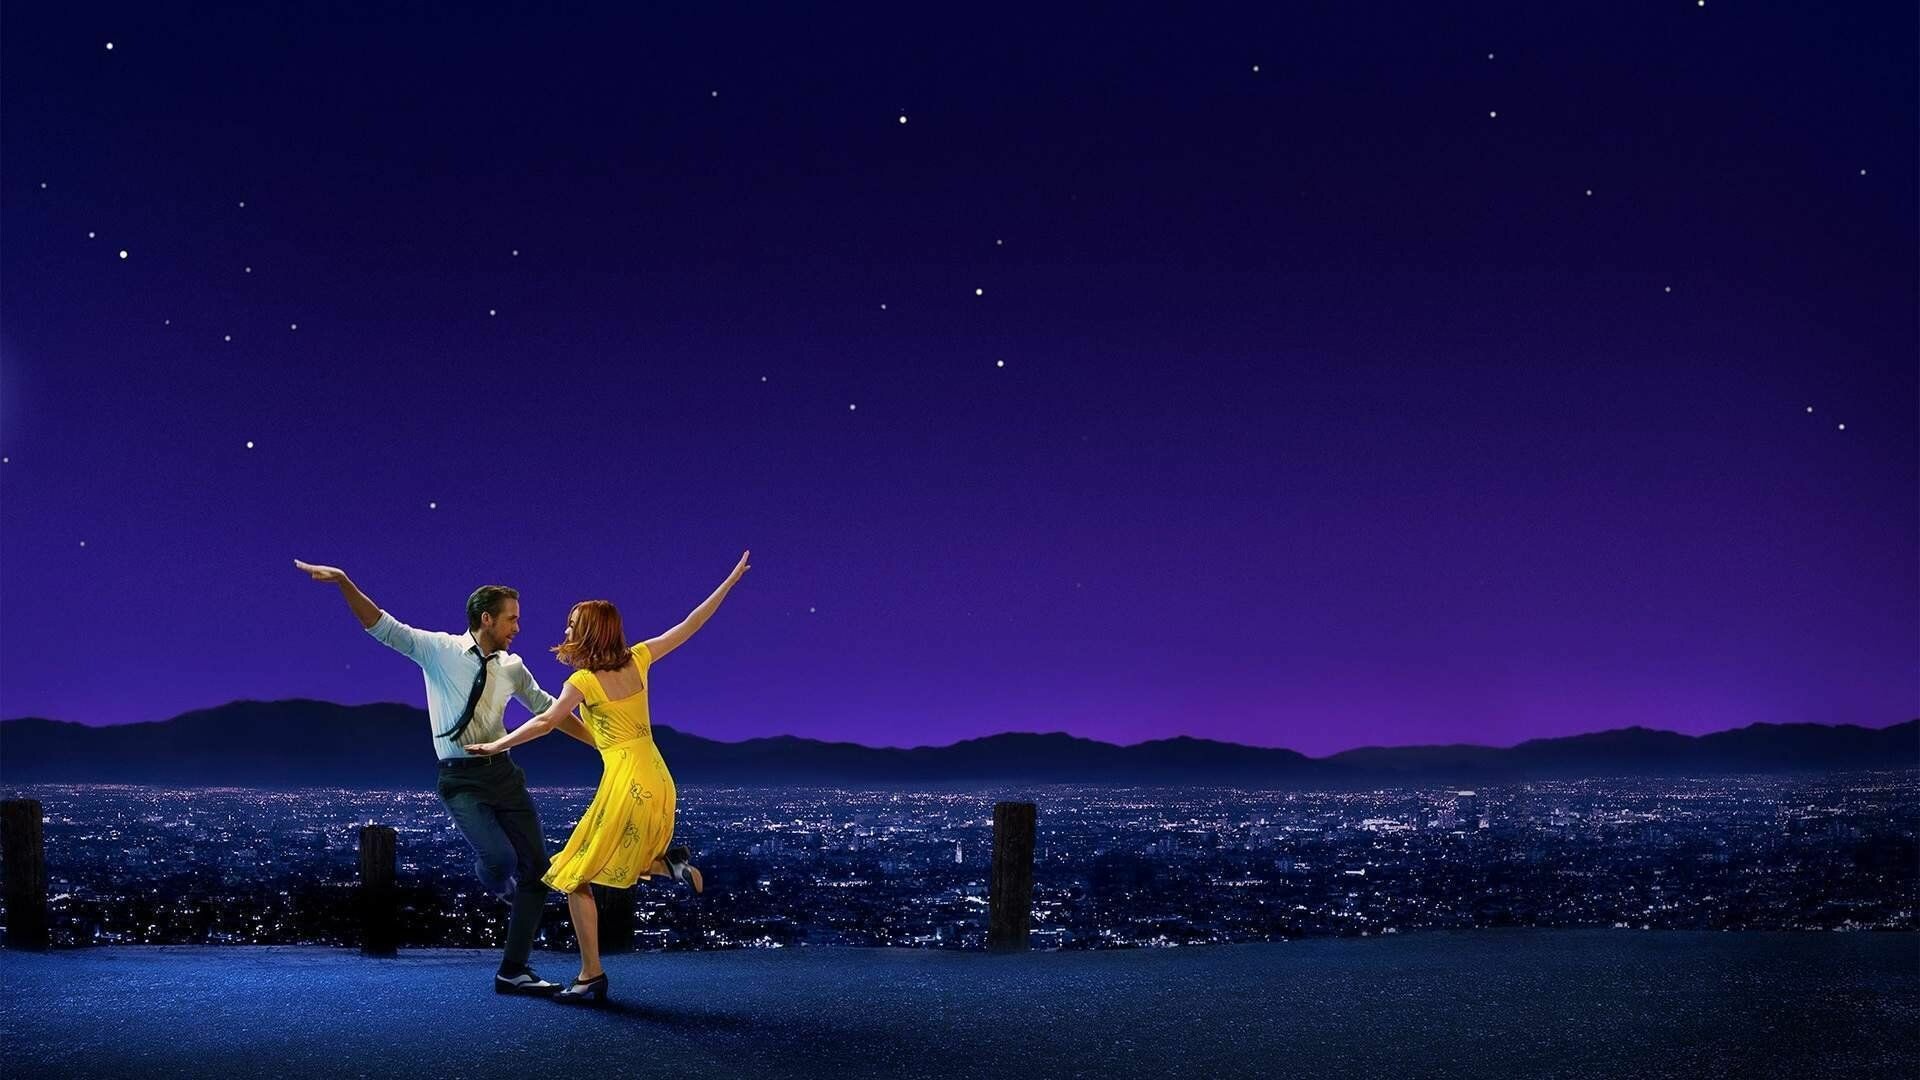 La La Land: The first major centerpiece scene is a long walk between Sebastian and Mia as the sun is setting over the Hollywood Hills. 1920x1080 Full HD Wallpaper.